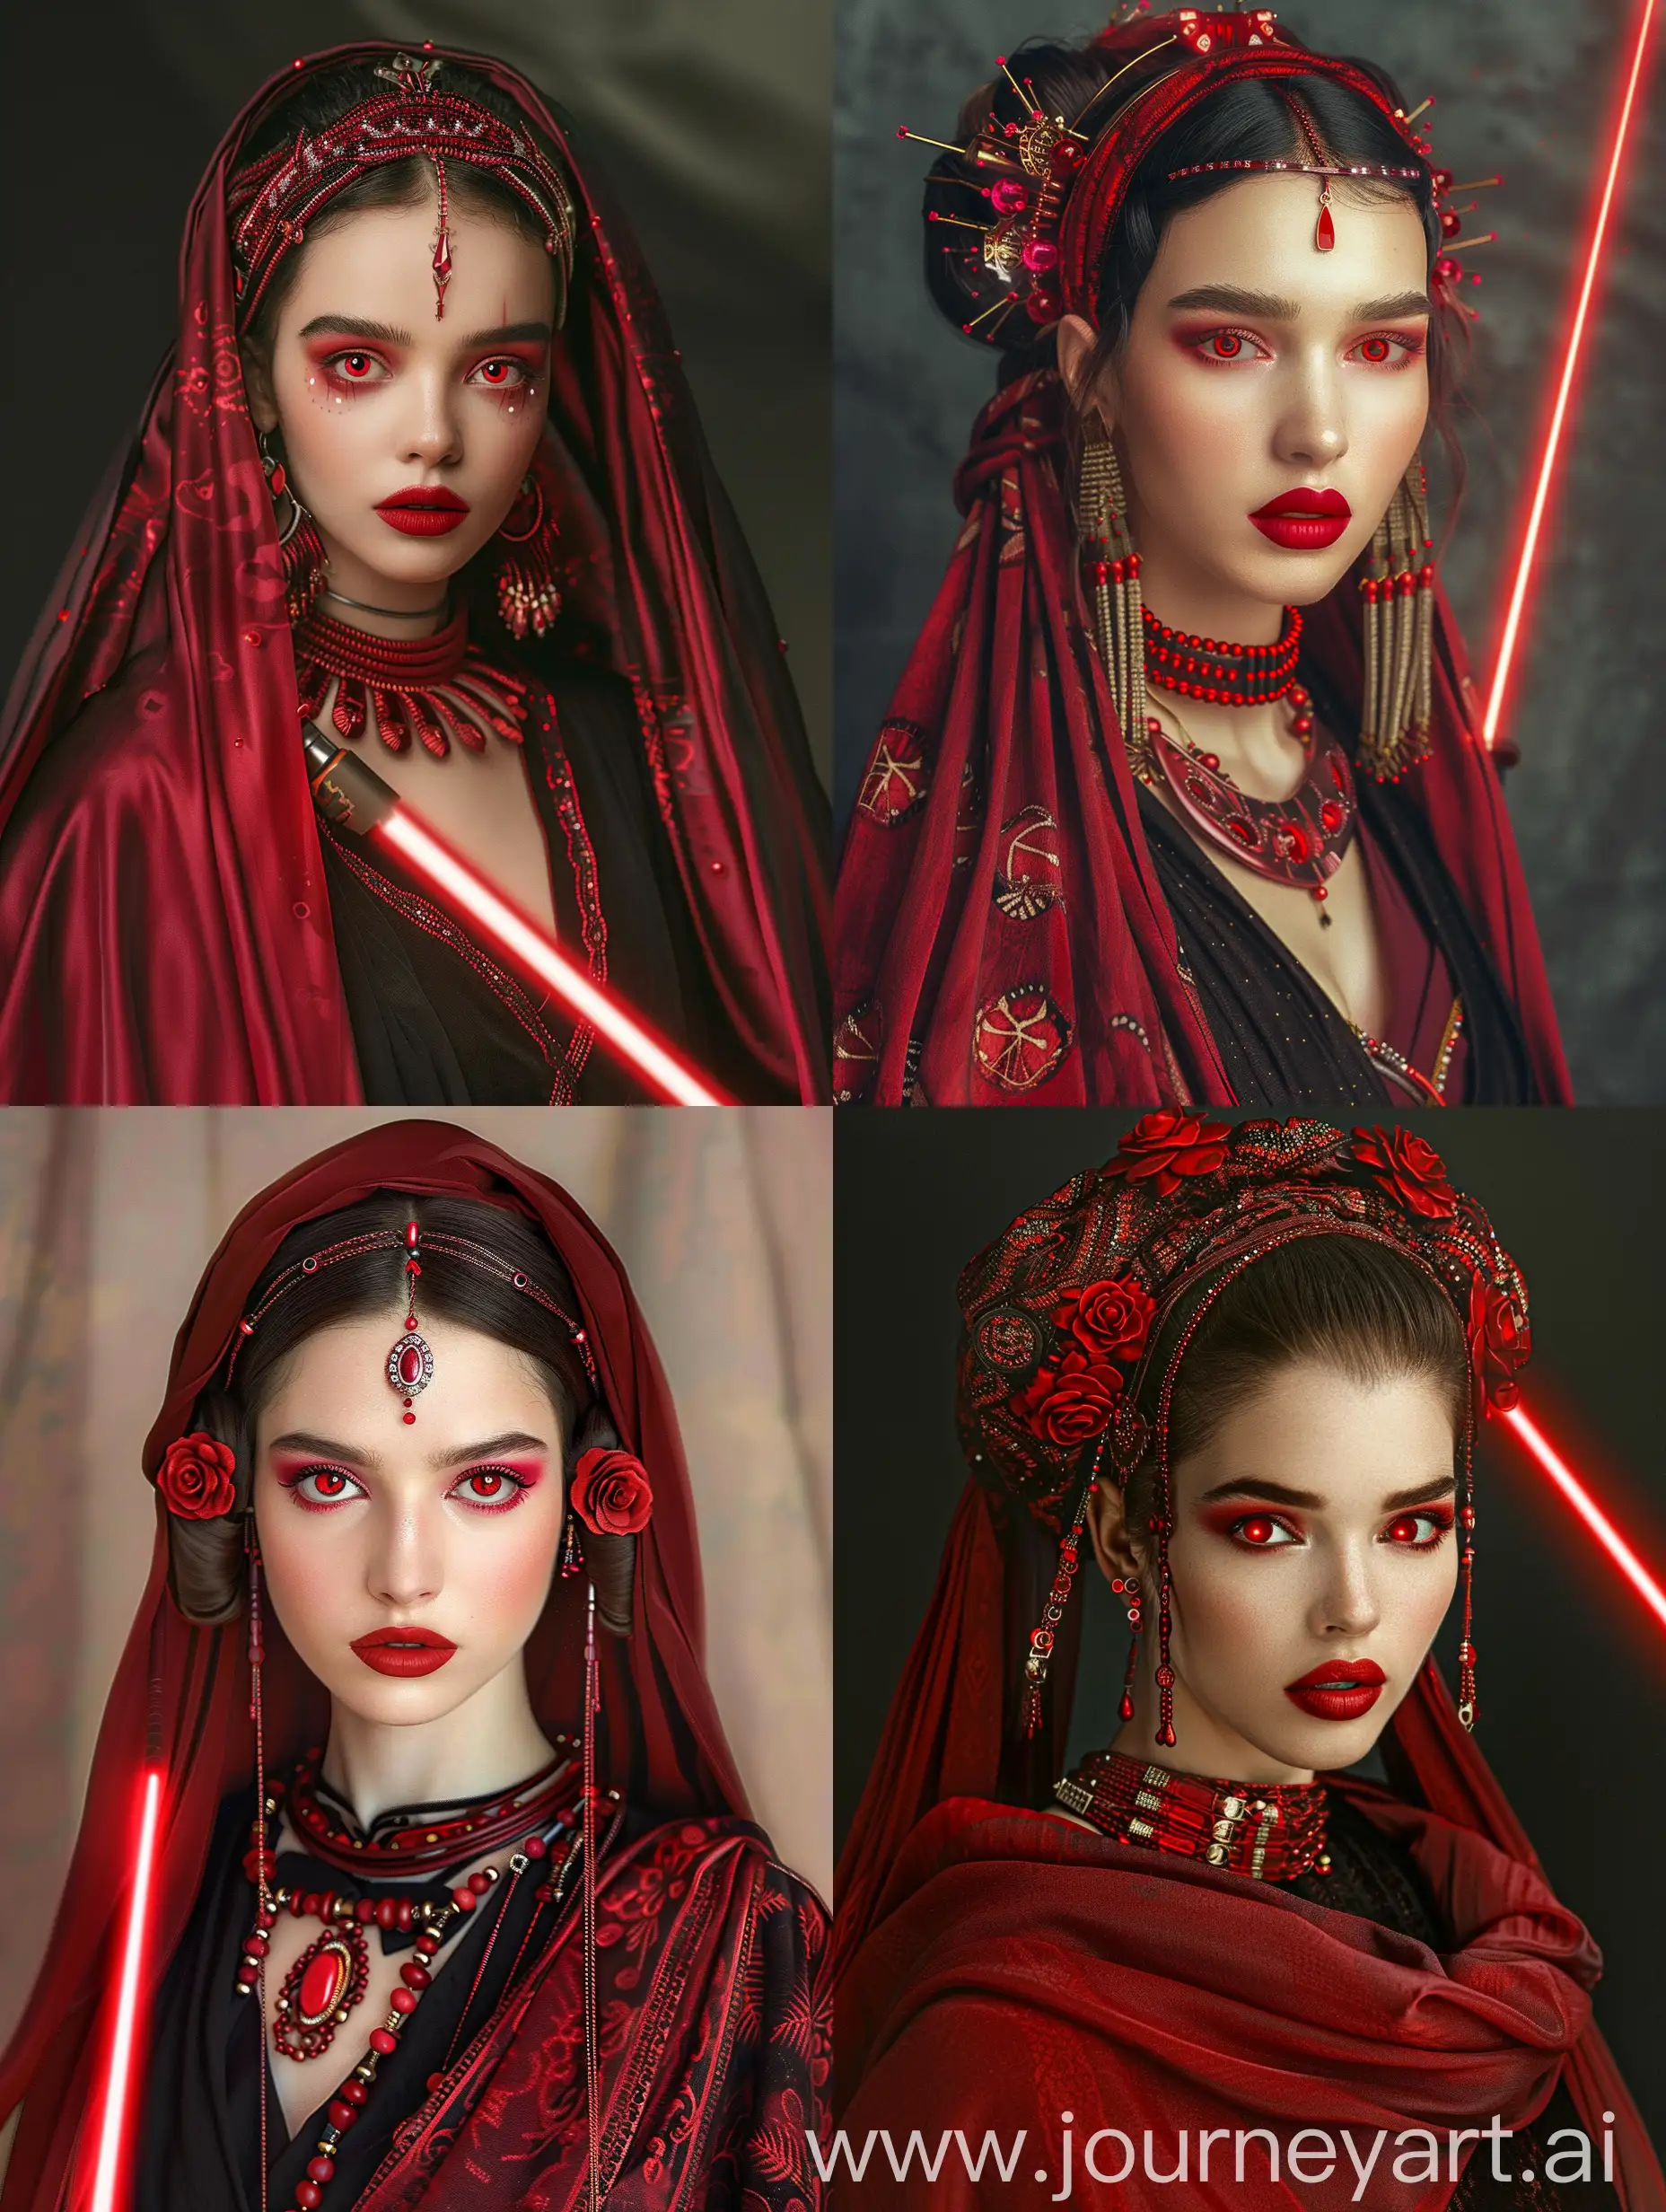 *A young and beautiful woman with red lipstick and a red shawl covering her hair, which is decorated with beautiful red jewelry. She has big red eyes and looks like Padme Amidala. She is a Sith apprentice with a red lightsaber and a red black outfit. Artgerm, Padme Amidala, red lipstick, red shawl, red eyes, beautiful, jewelry, Sith, apprentice, big red eyes, red lightsaber, red black outfit, evil.*